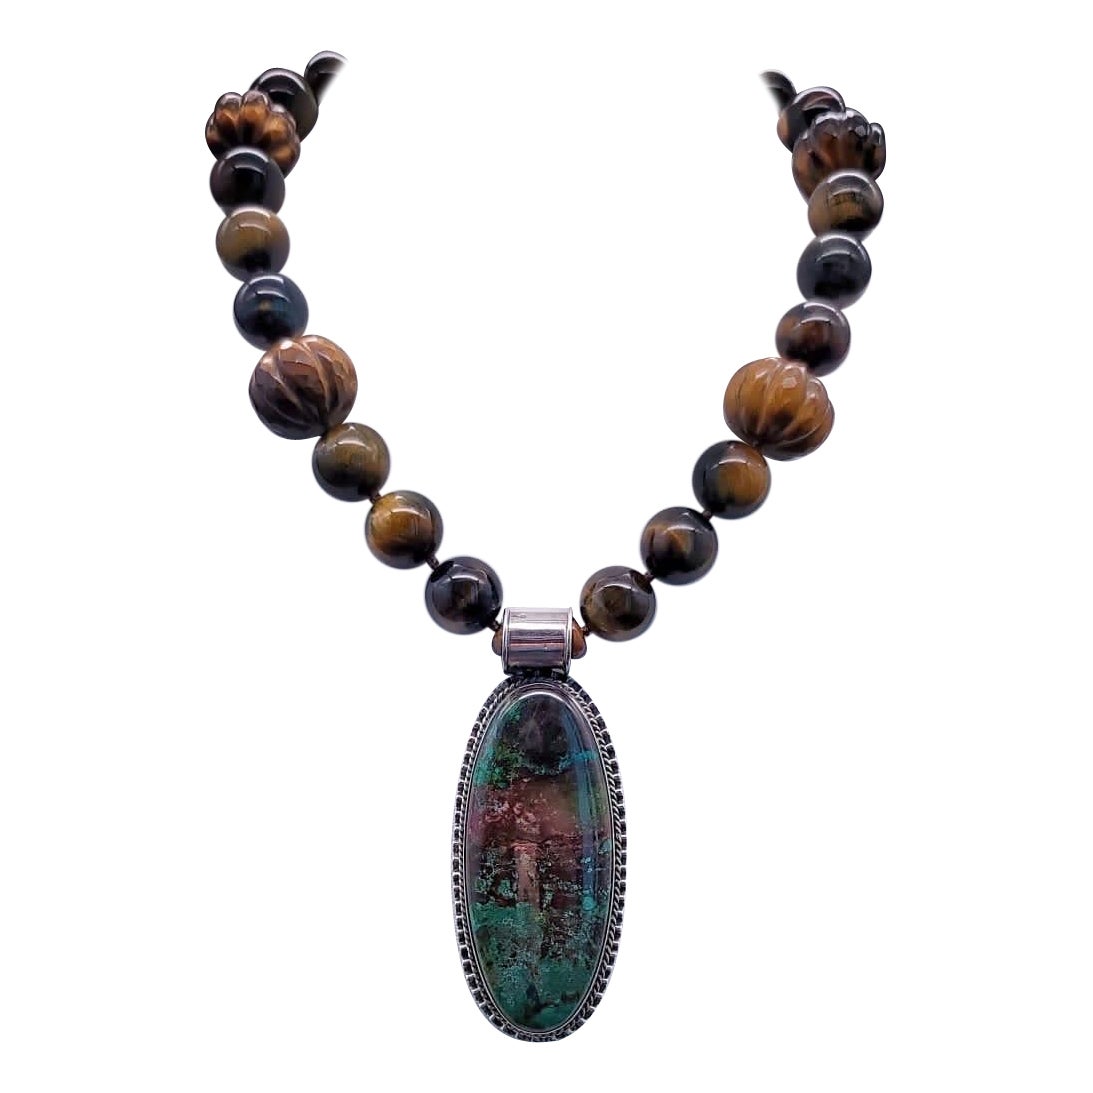 A.Jeschel A Powerful single strand Tiger Eye necklace with Chrysocolla Pendant.